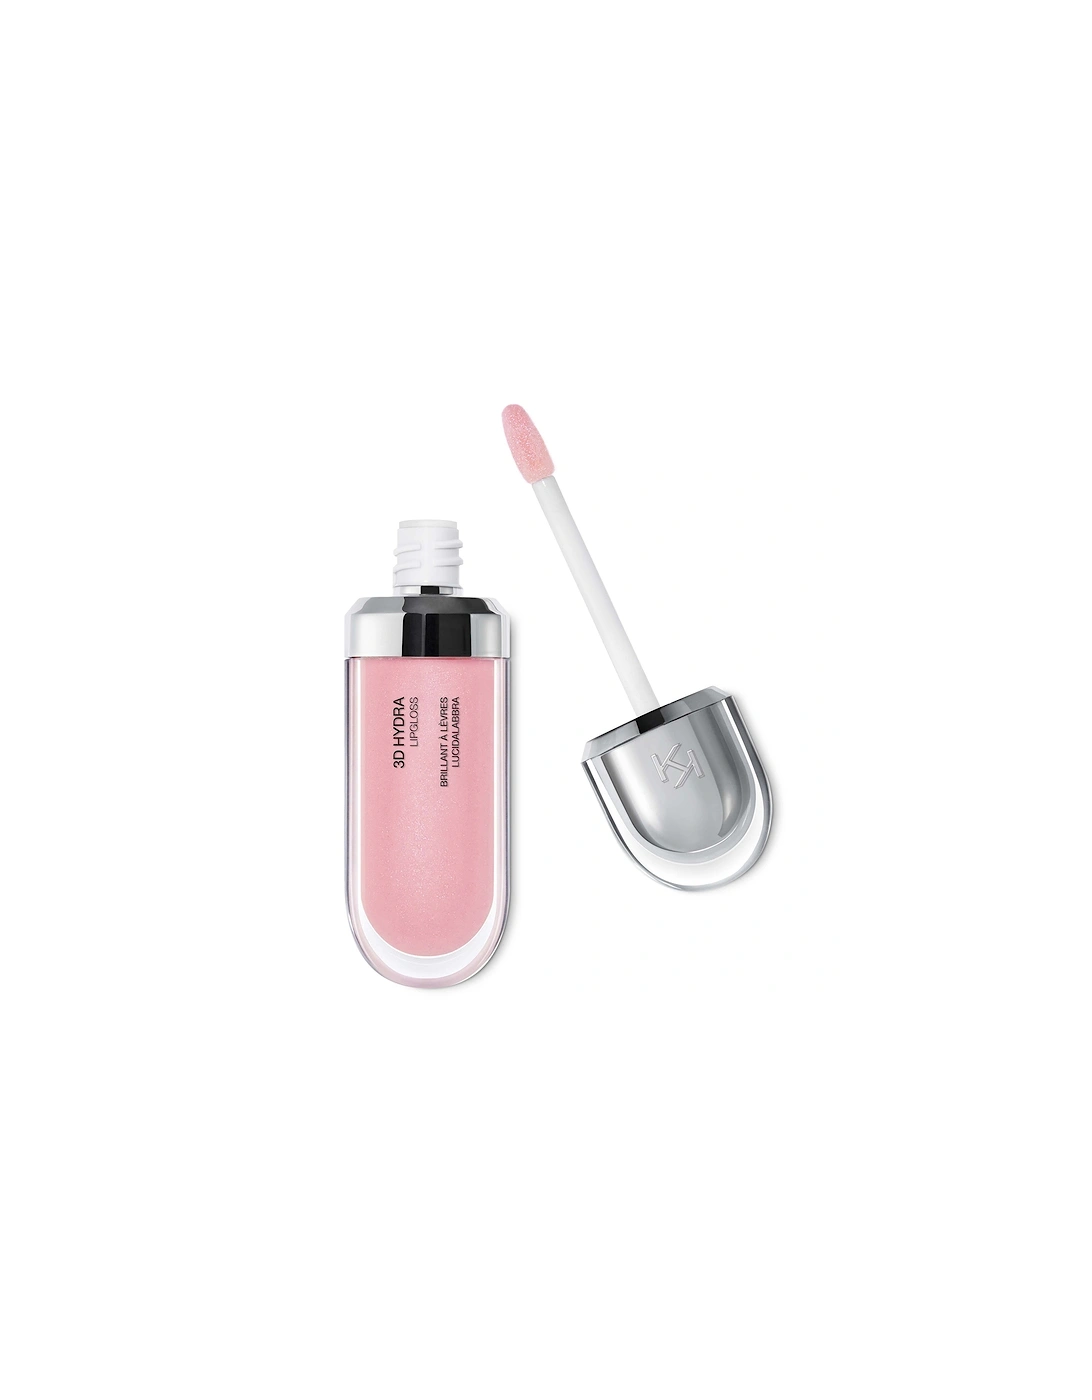 3D Hydra Lipgloss 6.5ml - 06 Candy Rose, 2 of 1